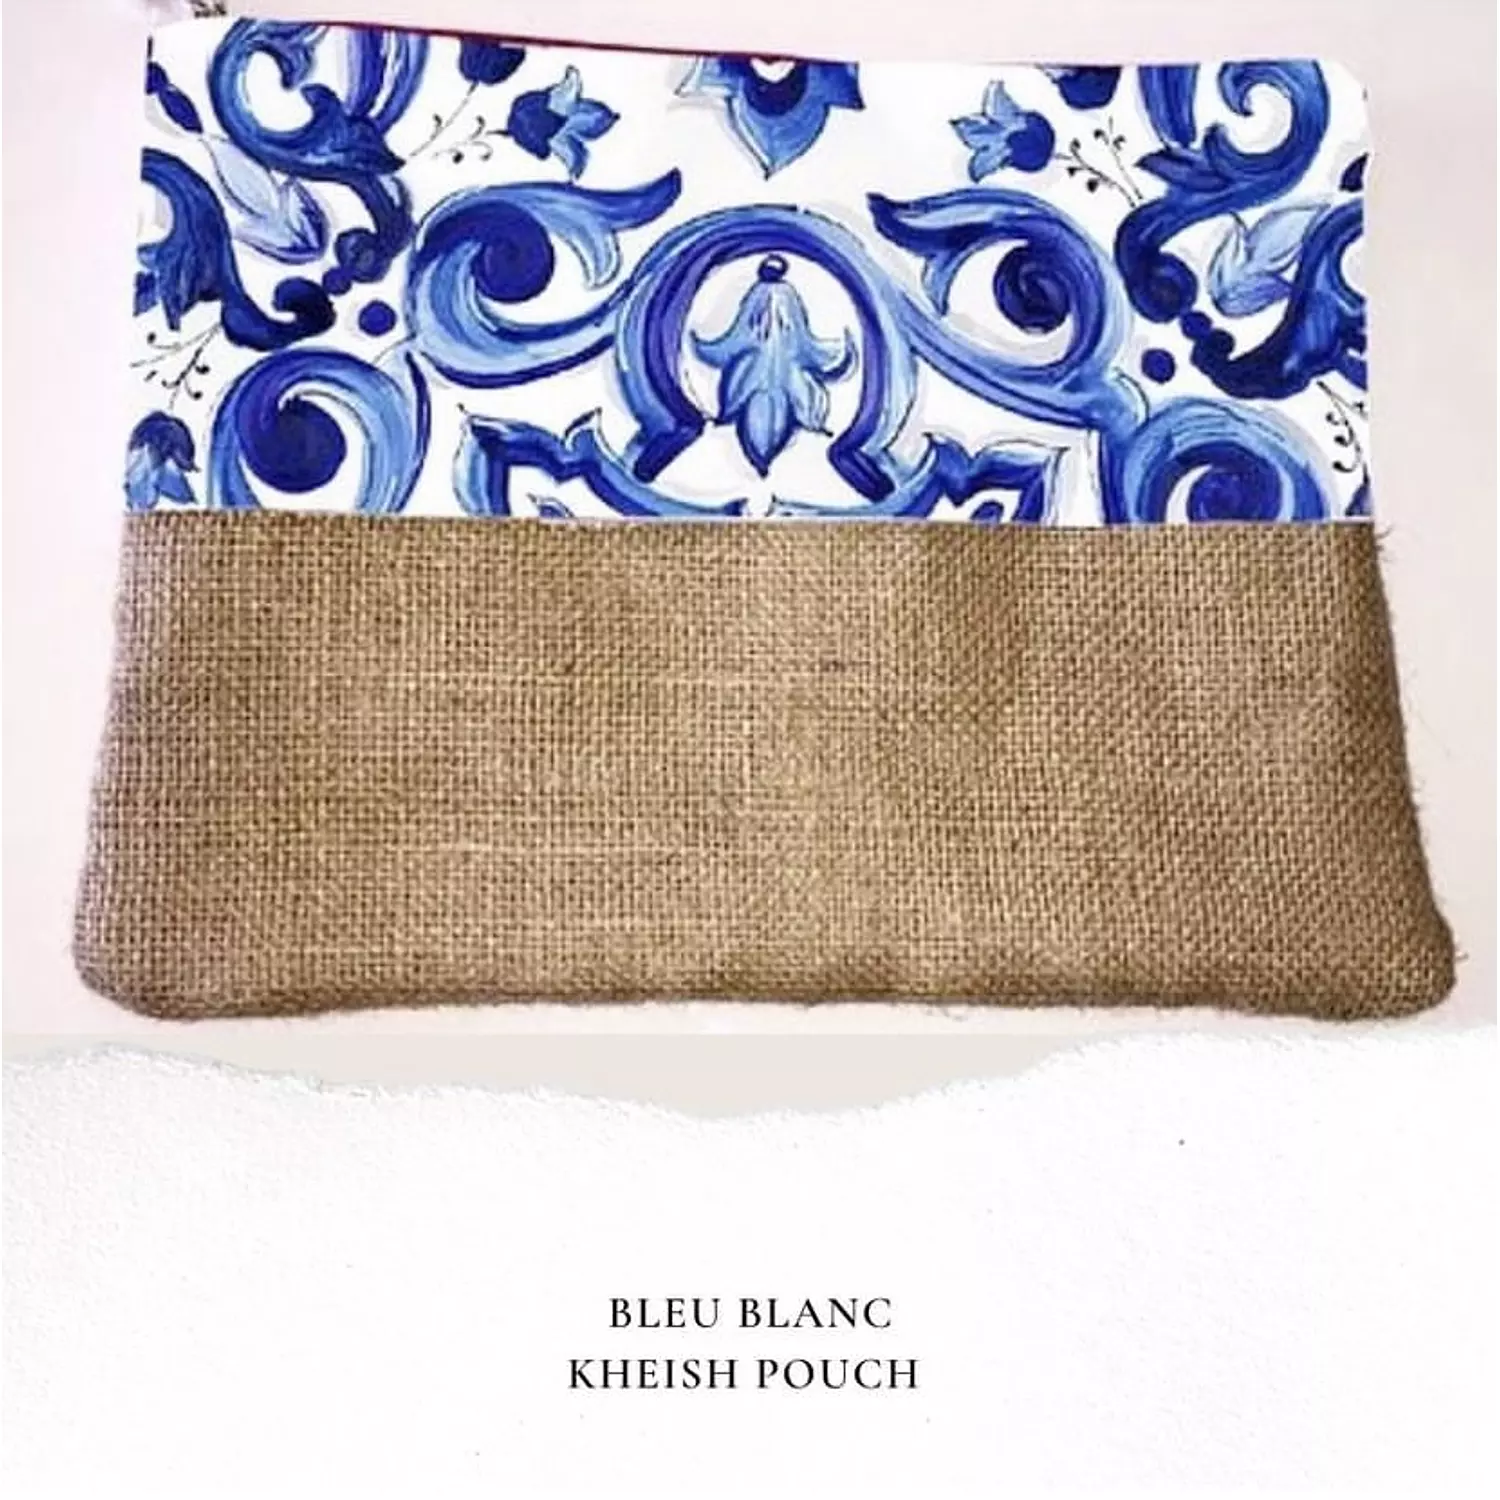 Bleu Blanc Kheish Pouch Leather Strip hover image